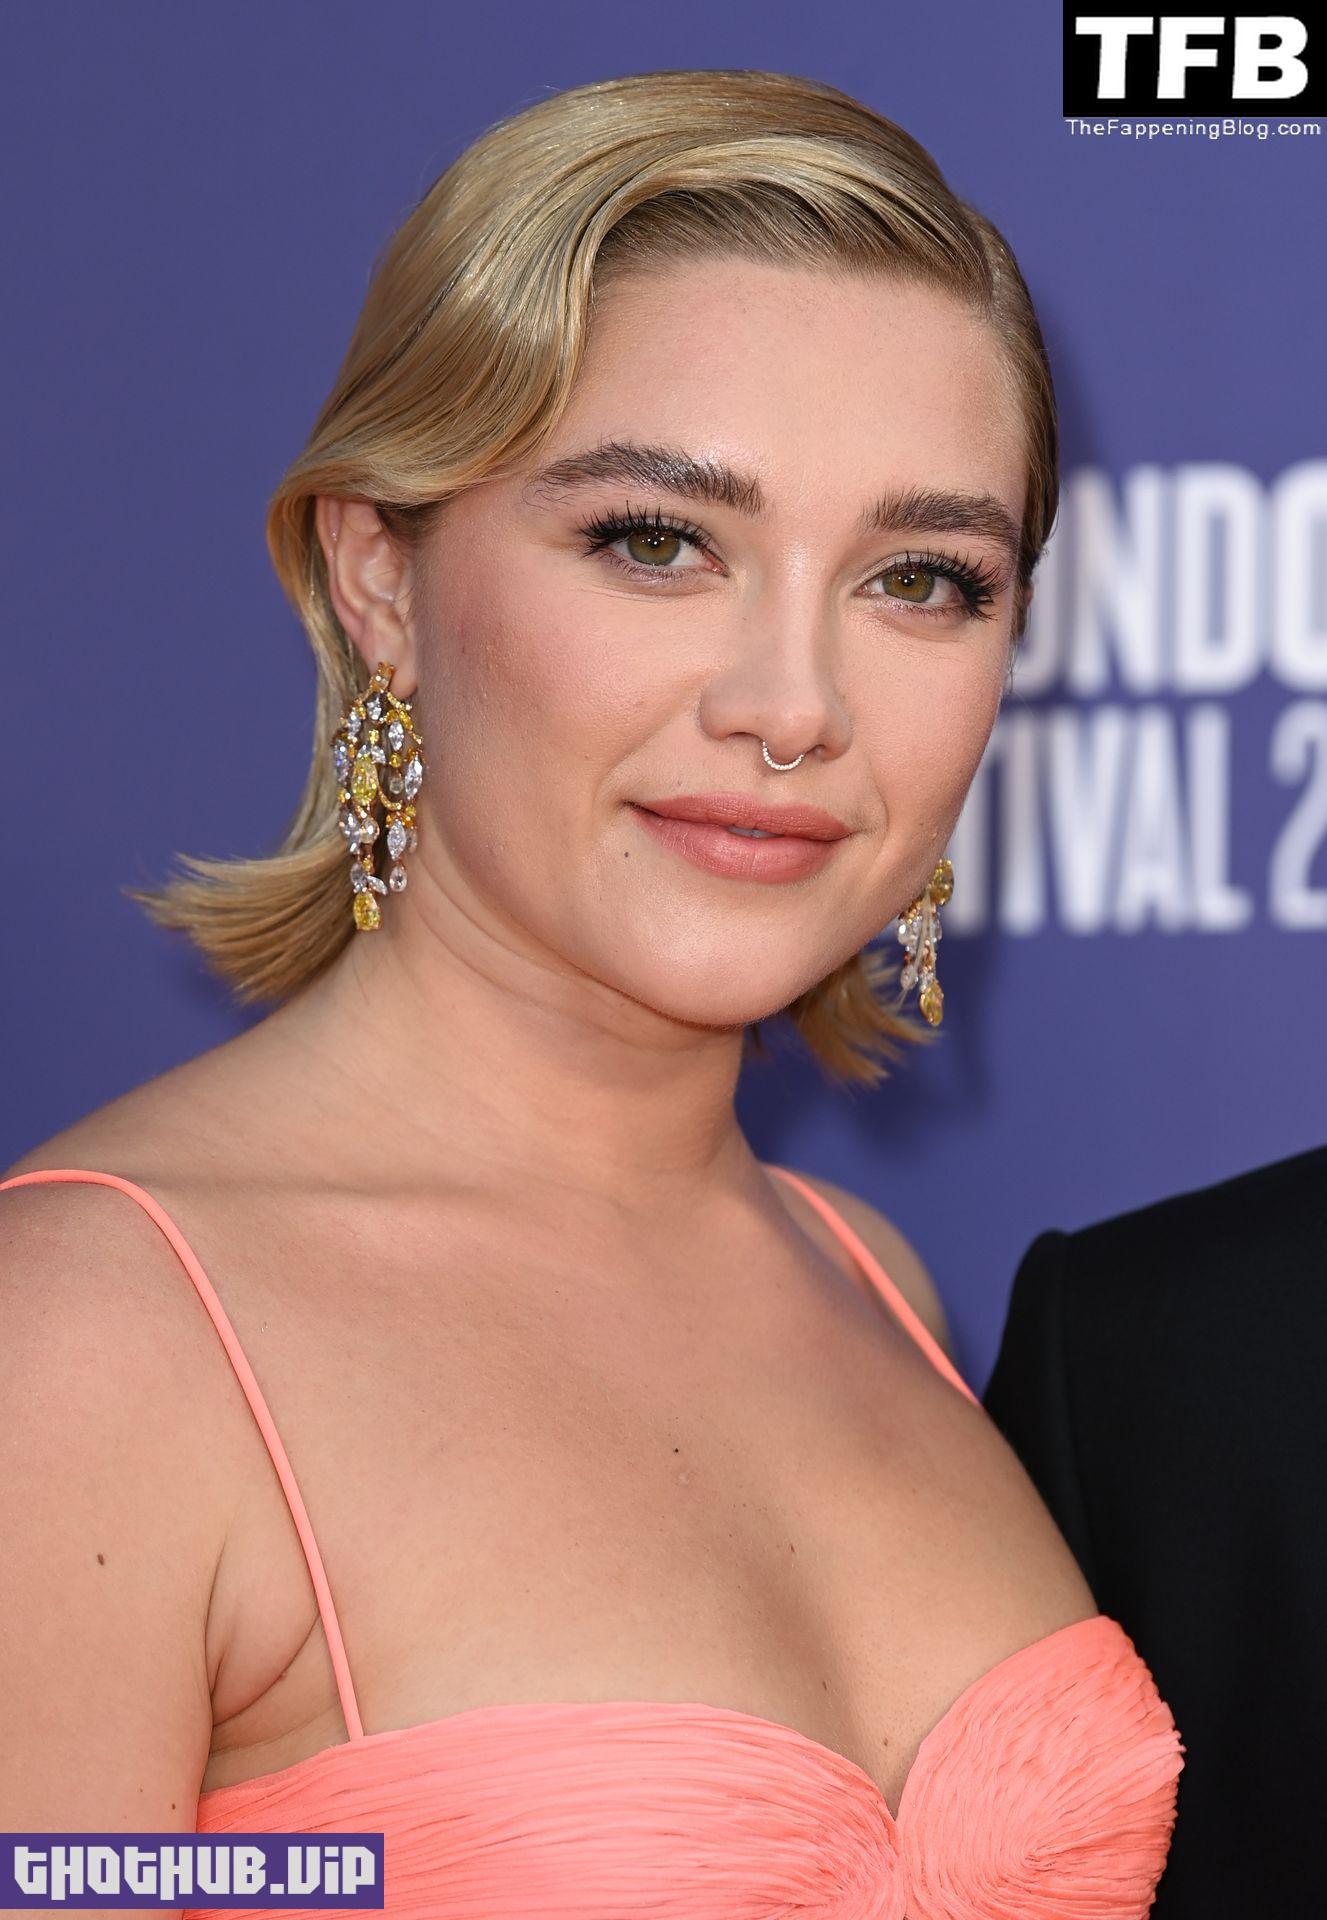 Florence Pugh Sexy The Fappening Blog 22 1